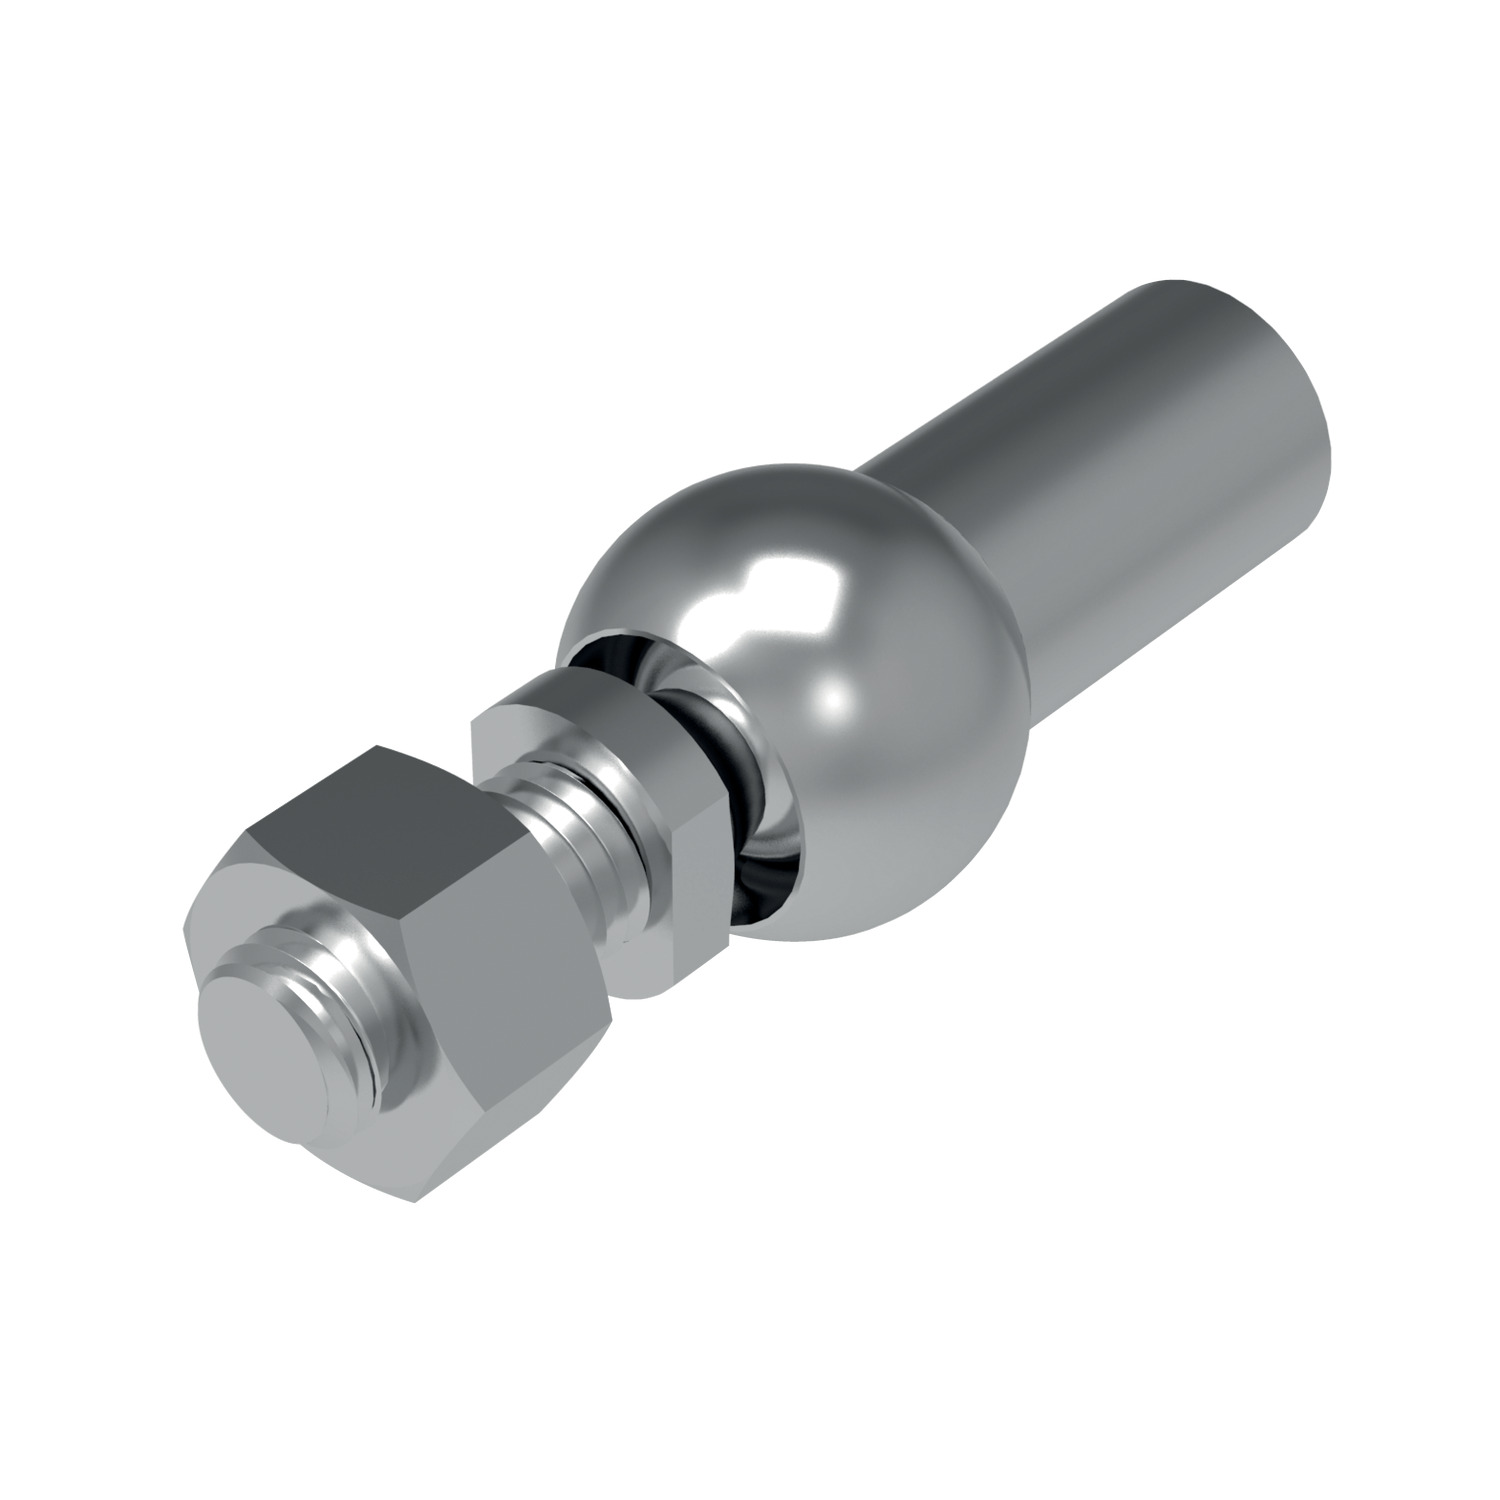 R3507 Stainless Axial Ball and Socket Joints